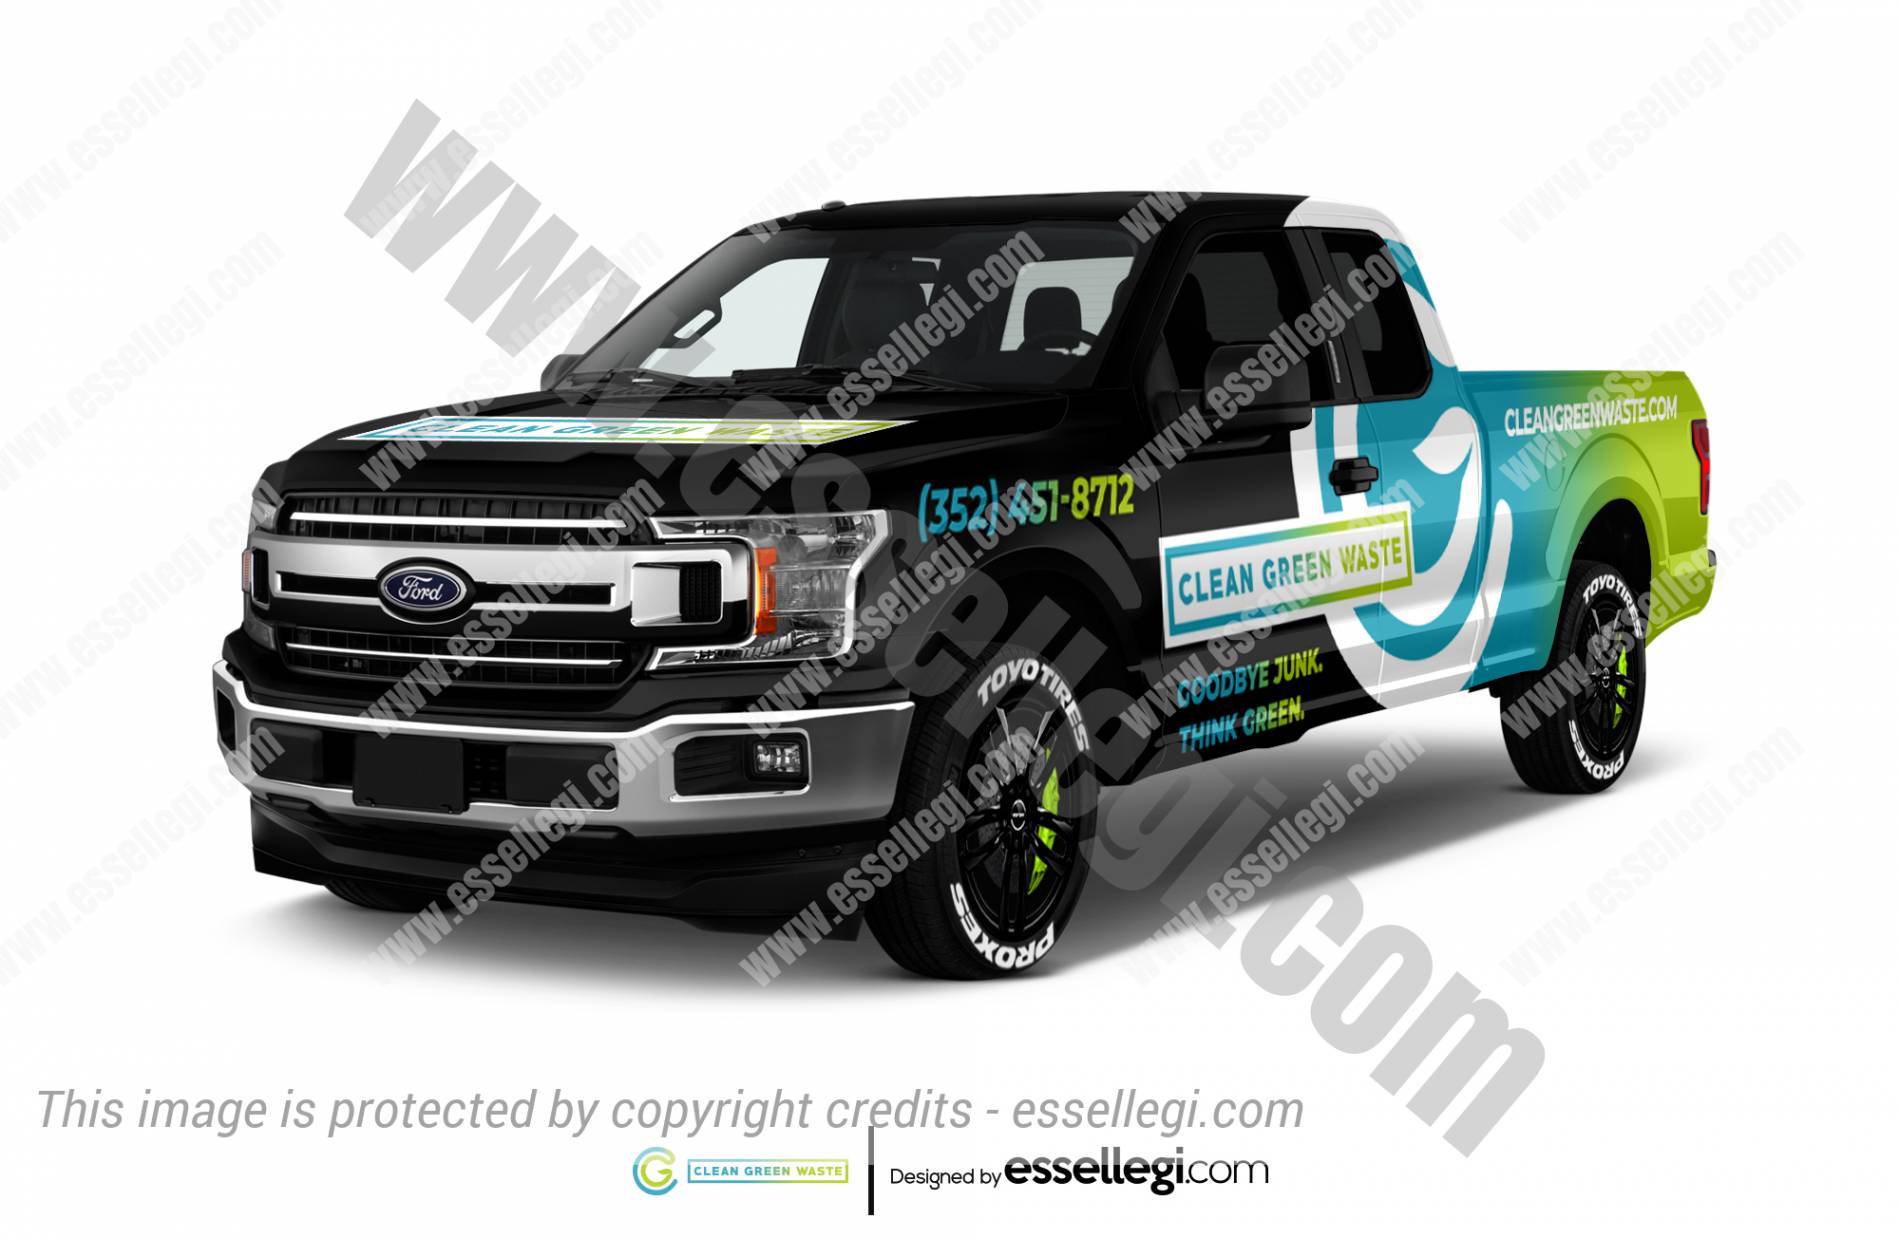 Ford F150 Wrap. Ford F150 | Truck Wrap Design by Essellegi. Ford Truck, Ford Trucks, Truck Wrap, Truck Wraps, Wrap Design, Vehicle Signage, Vehicle Wrap, Truck Signs, Vinyl Wrap, Truck Graphics, Vehicle Signs Vehicle Wraps, Vehicle Graphics, Truck Wrapping, Vehicle Wrapping Wrapped, Custom Wraps, Custom Graphics, Vinyl Wraps, Full Wrap Wrap Advertising, Commercial Wraps, Custom Design by Essellegi.